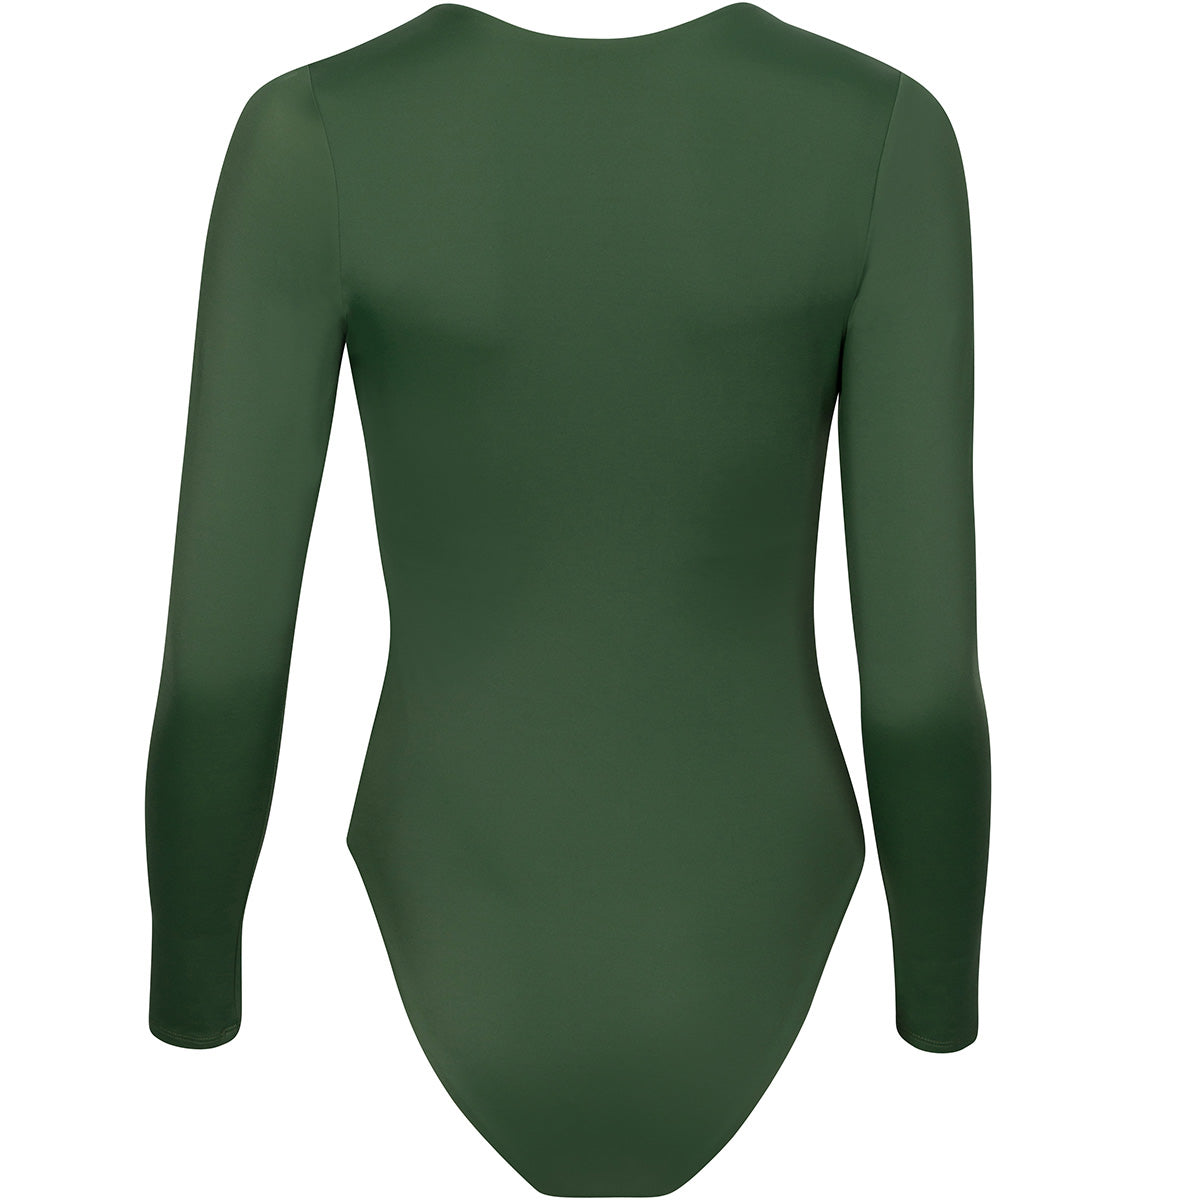 Genesis Square: The Modern Long Sleeve One Piece